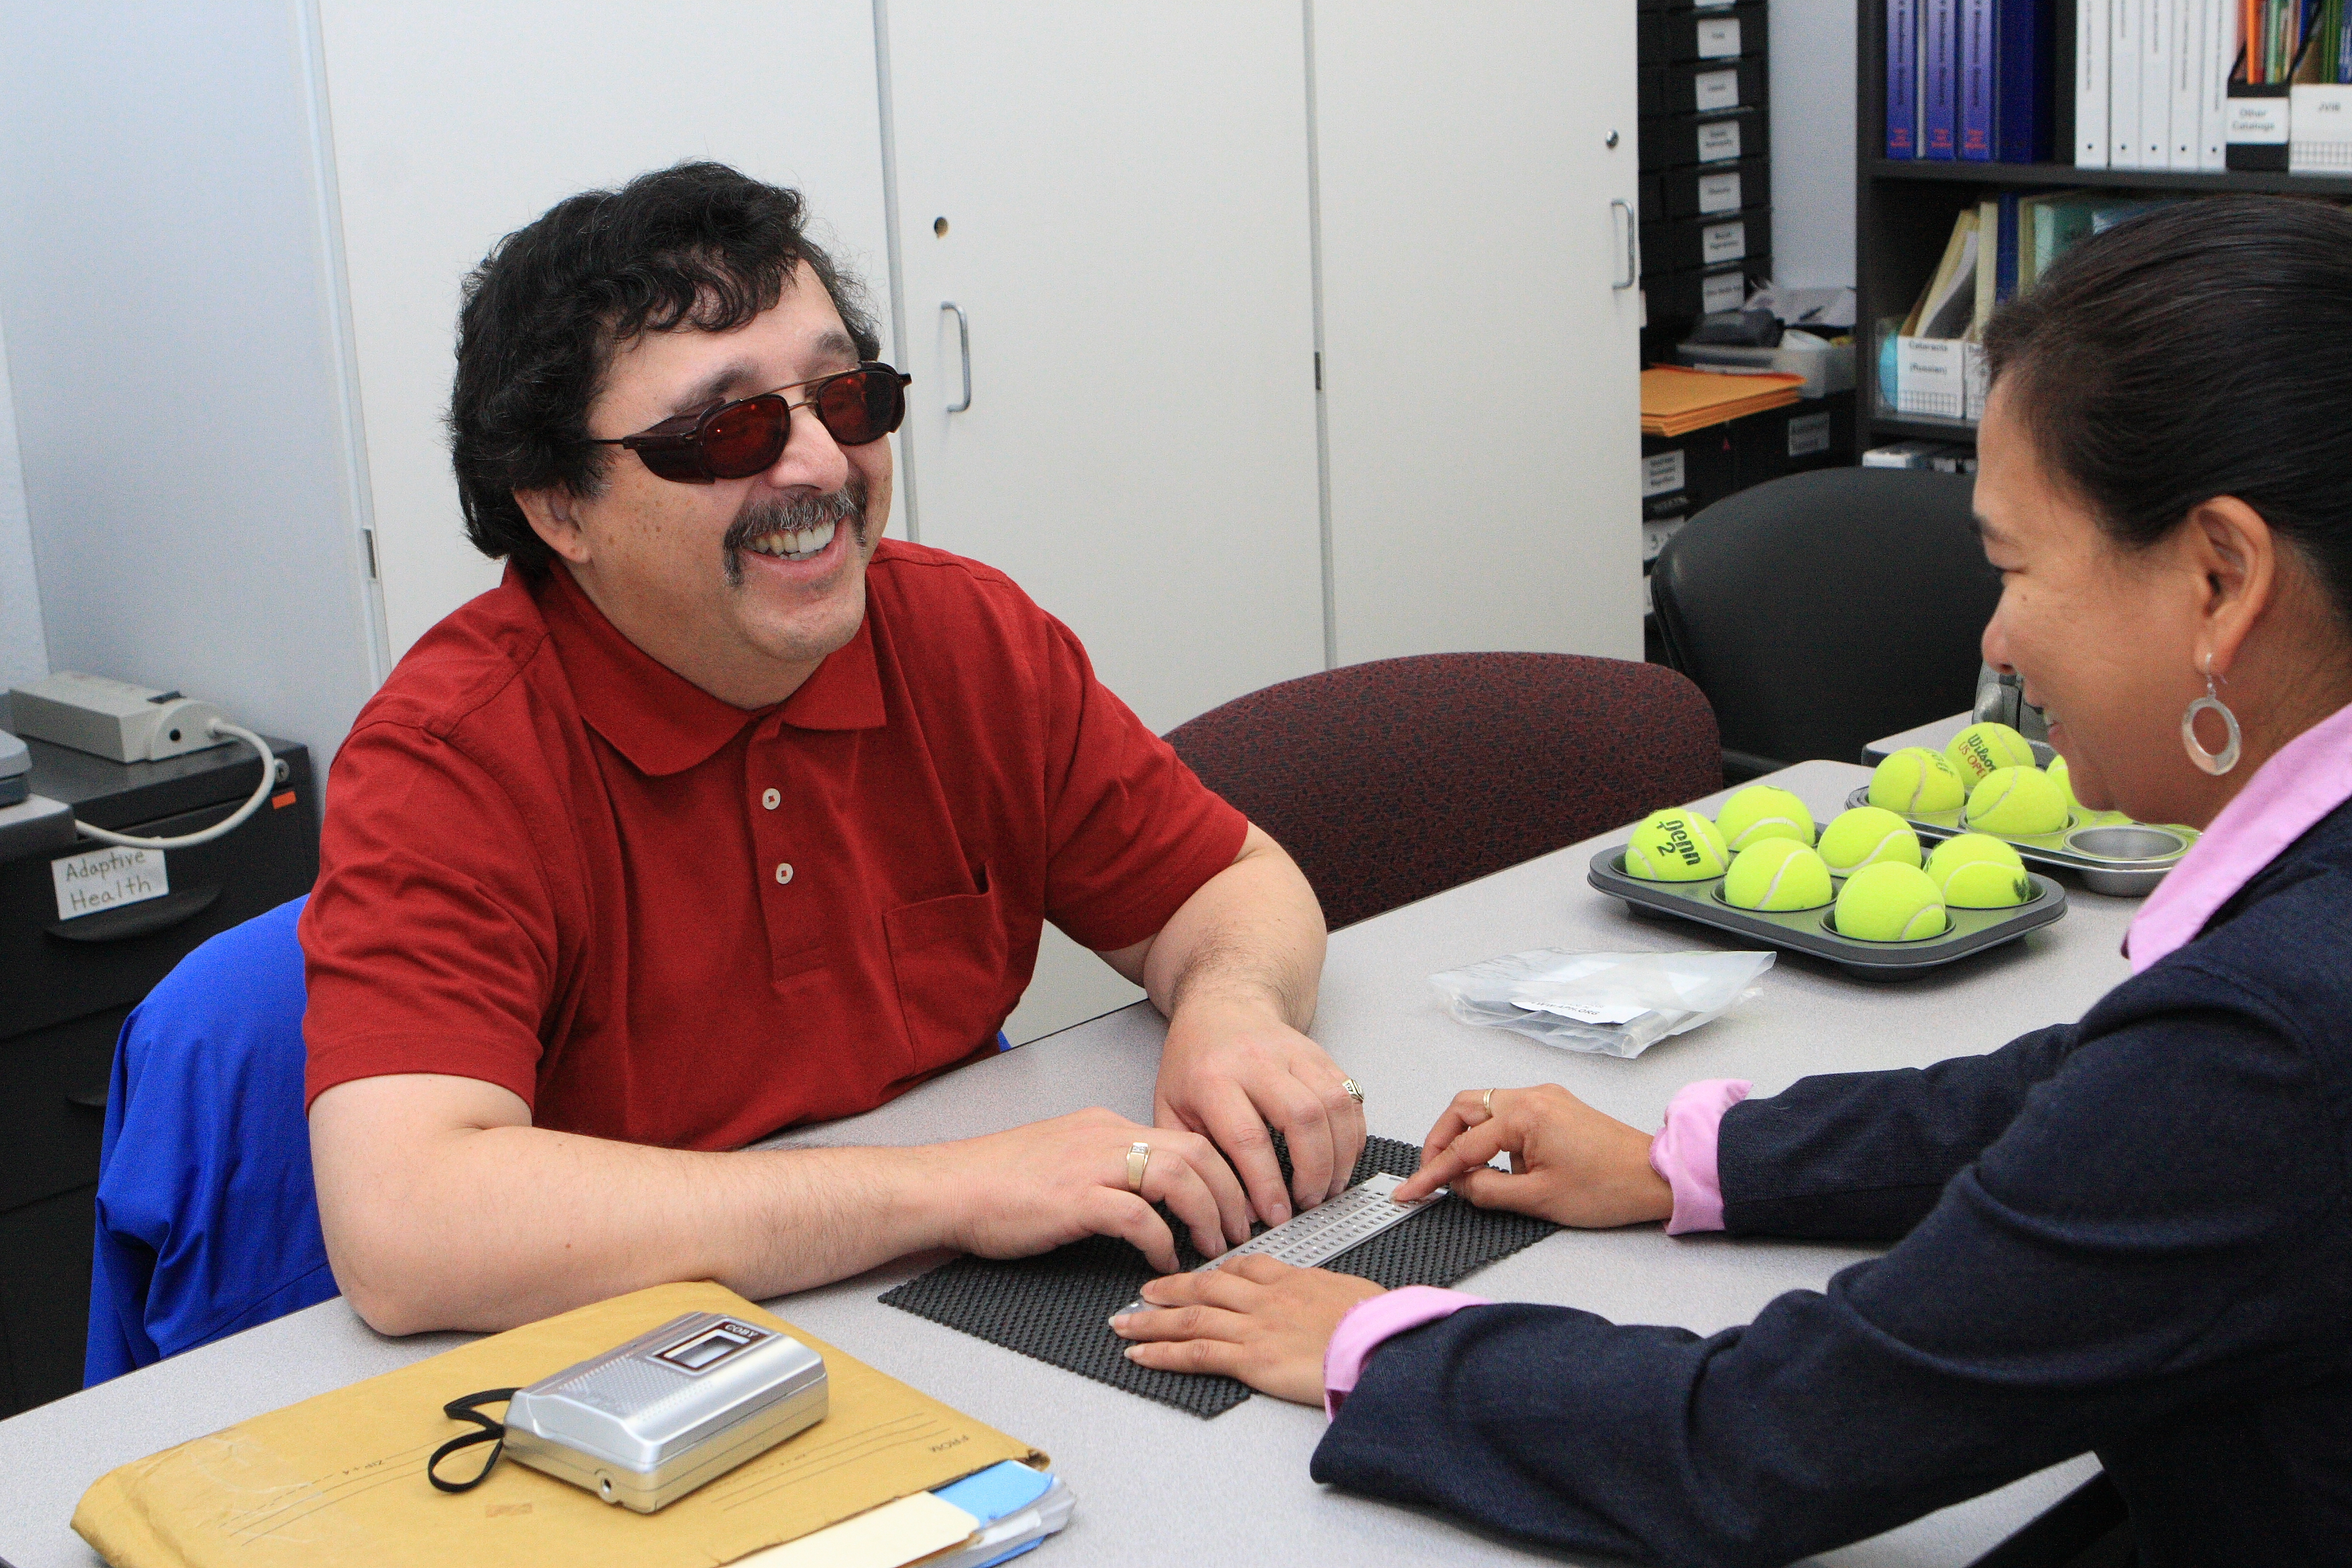 LightHouse braille instructor Divina Carlson teaches braille to a smiling student